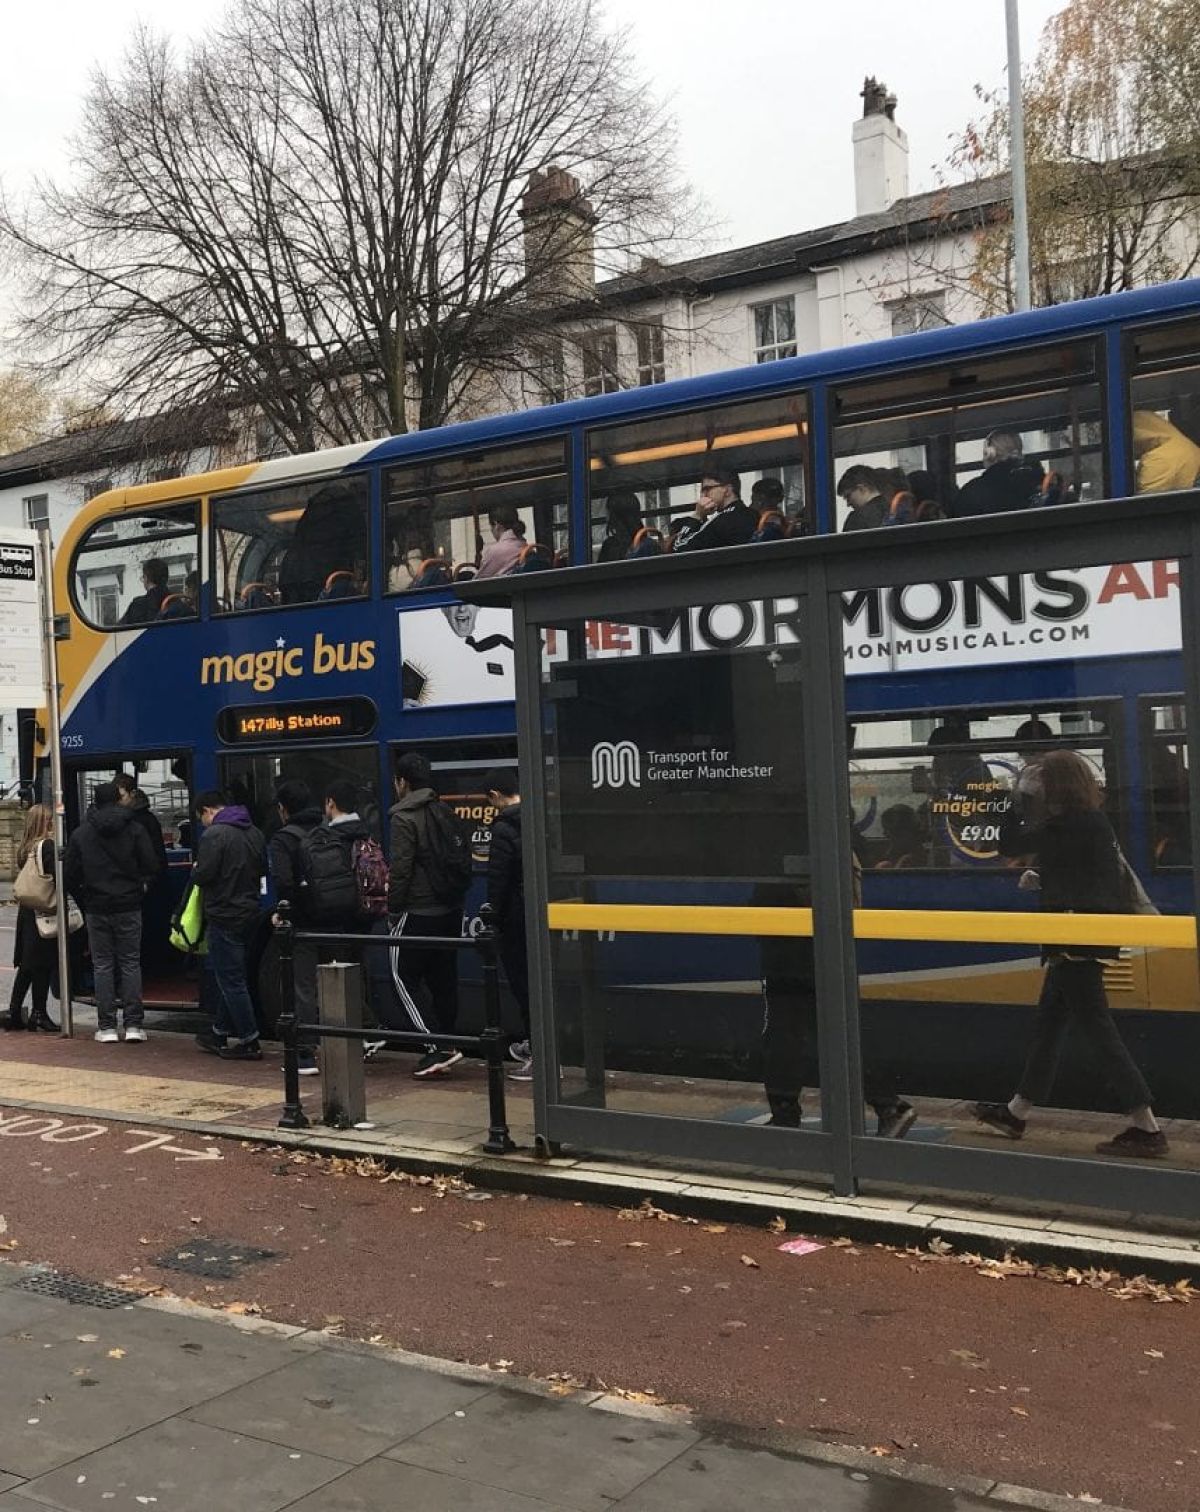 Stagecoach service accused of ‘unacceptable standards’